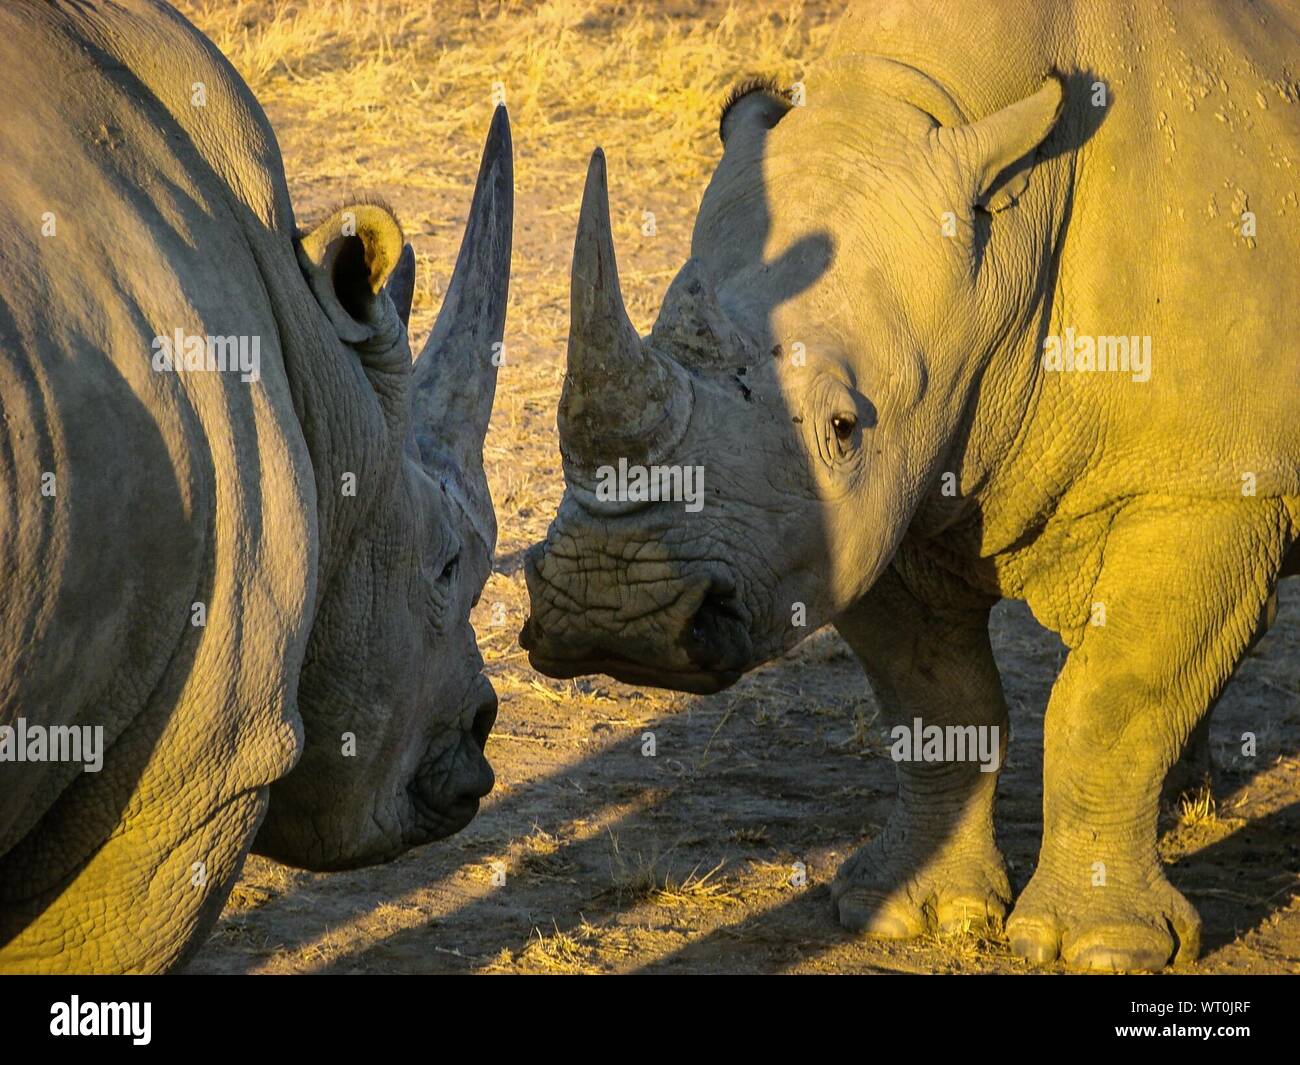 Rhinoceroses Standing Face To Face On Field Stock Photo